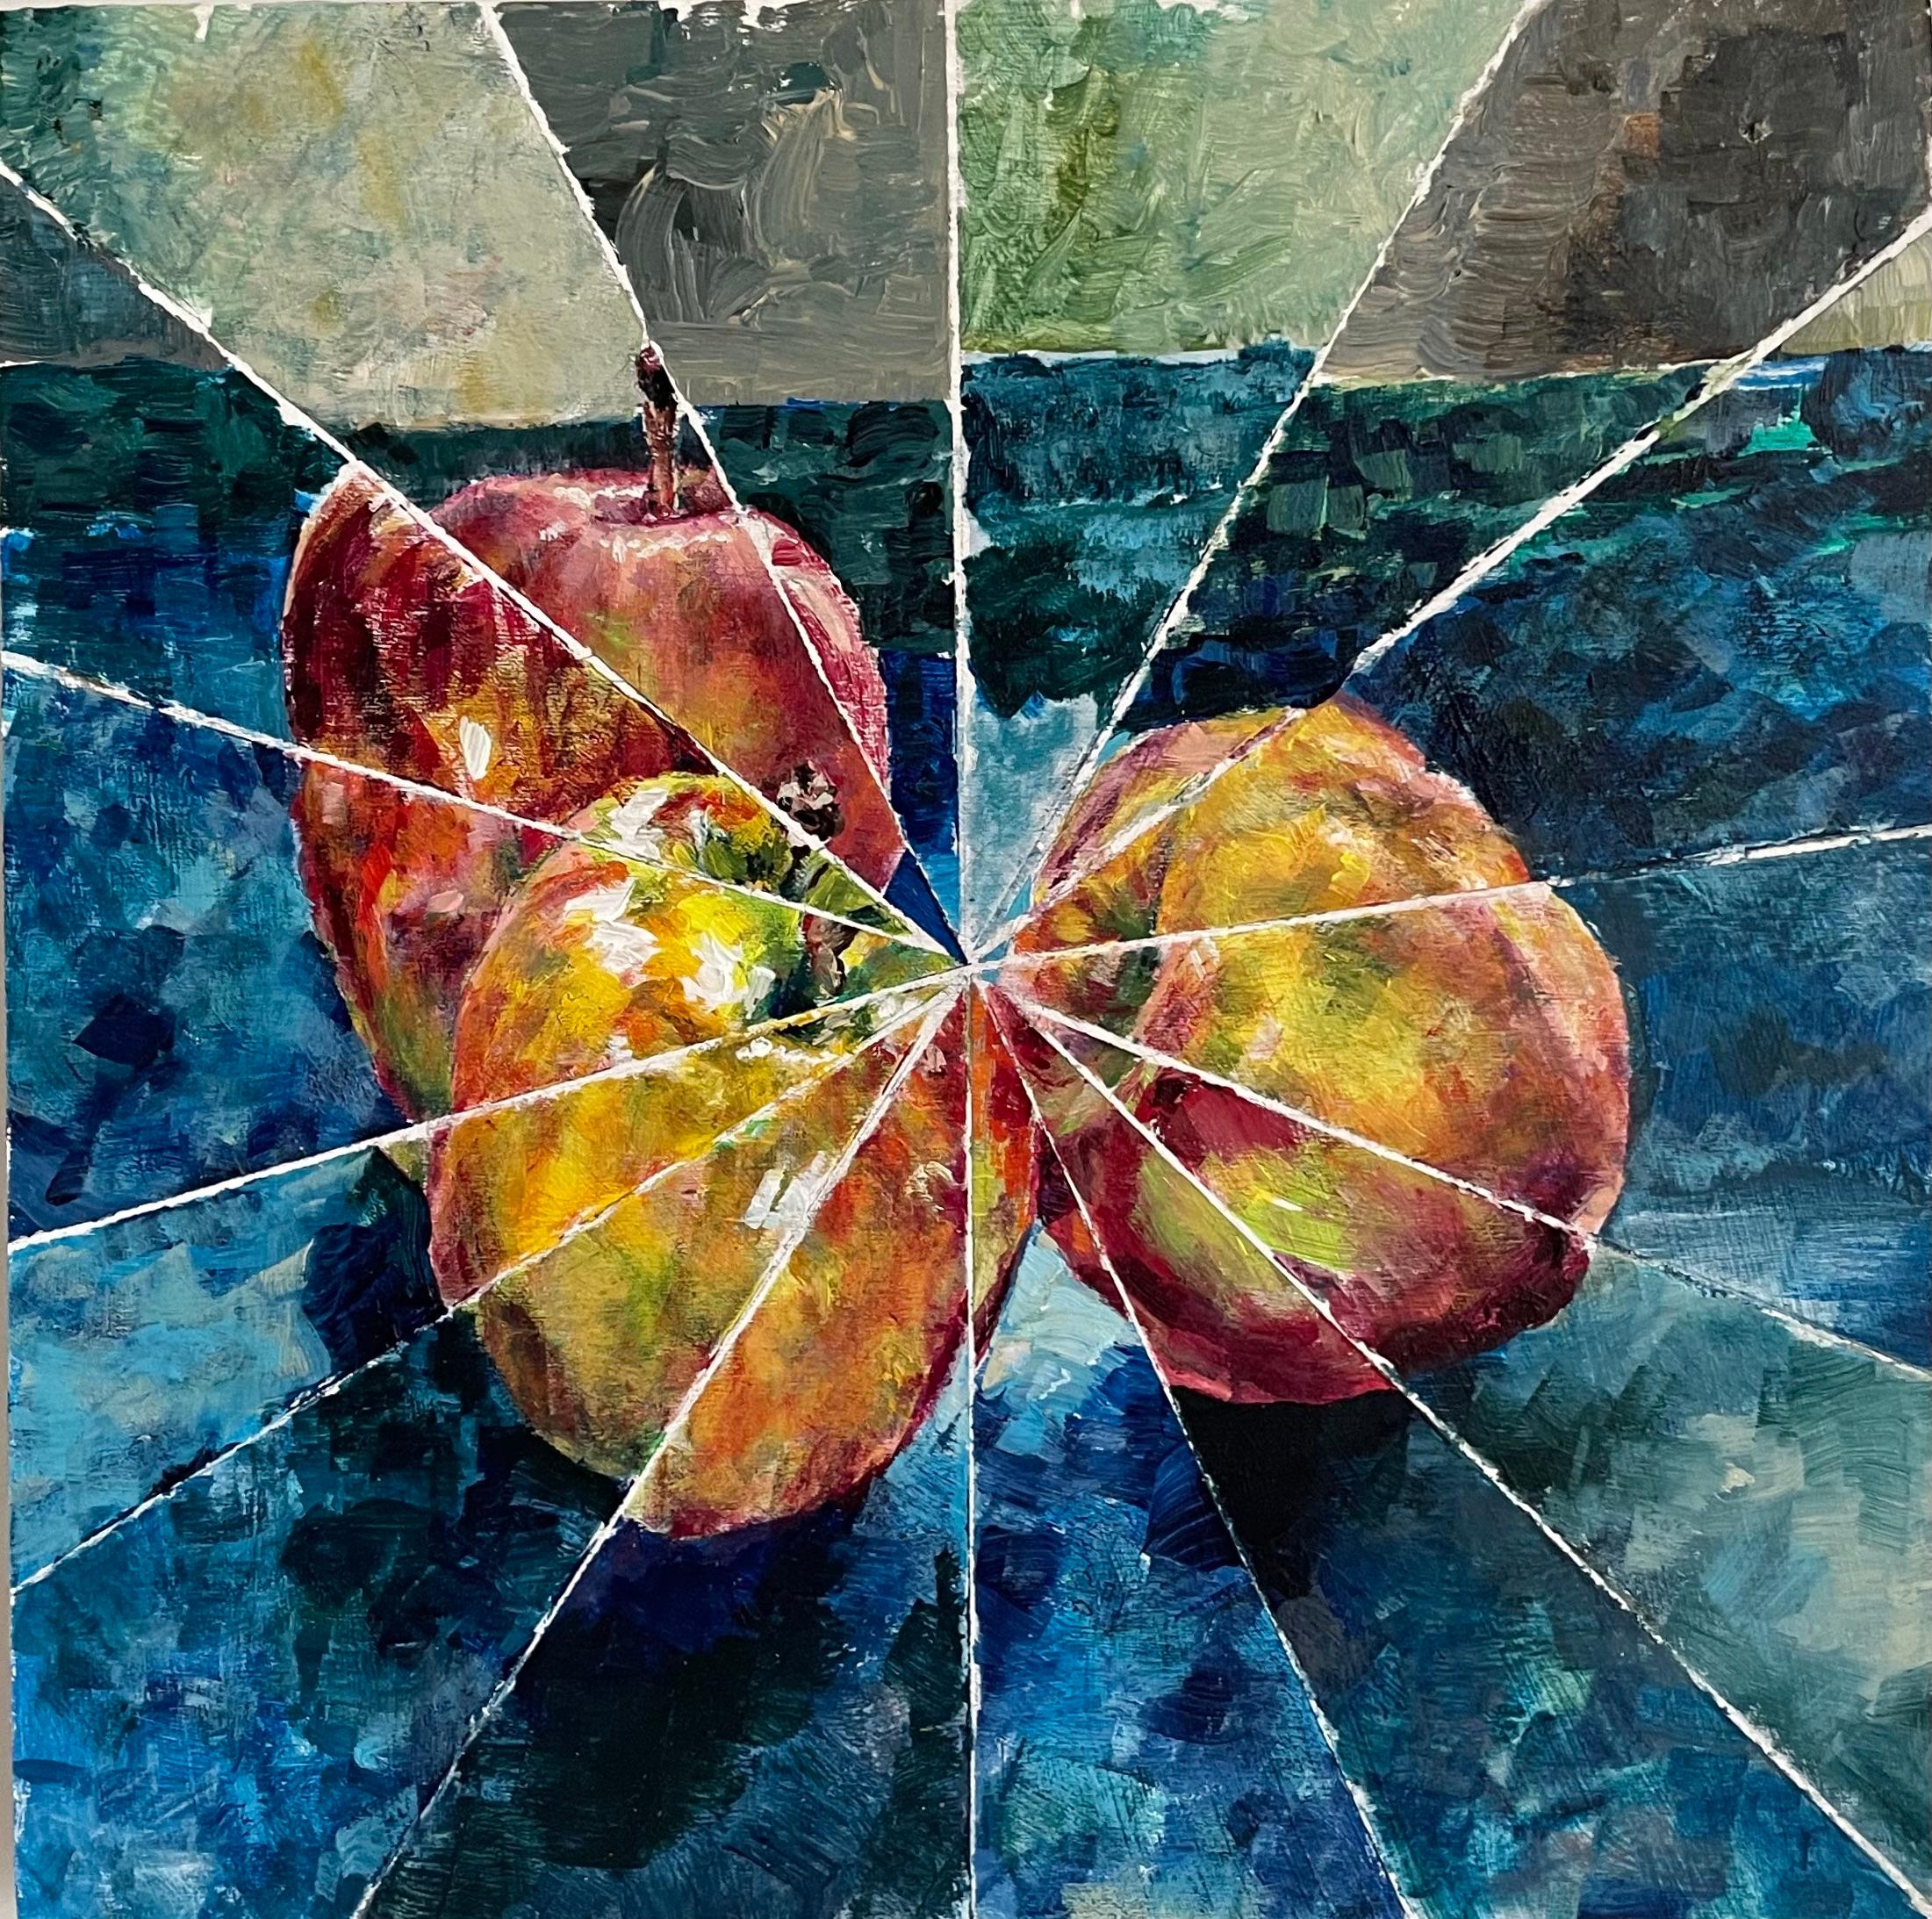 Three Apples: abstract still life interior painting of red/green apples on blue